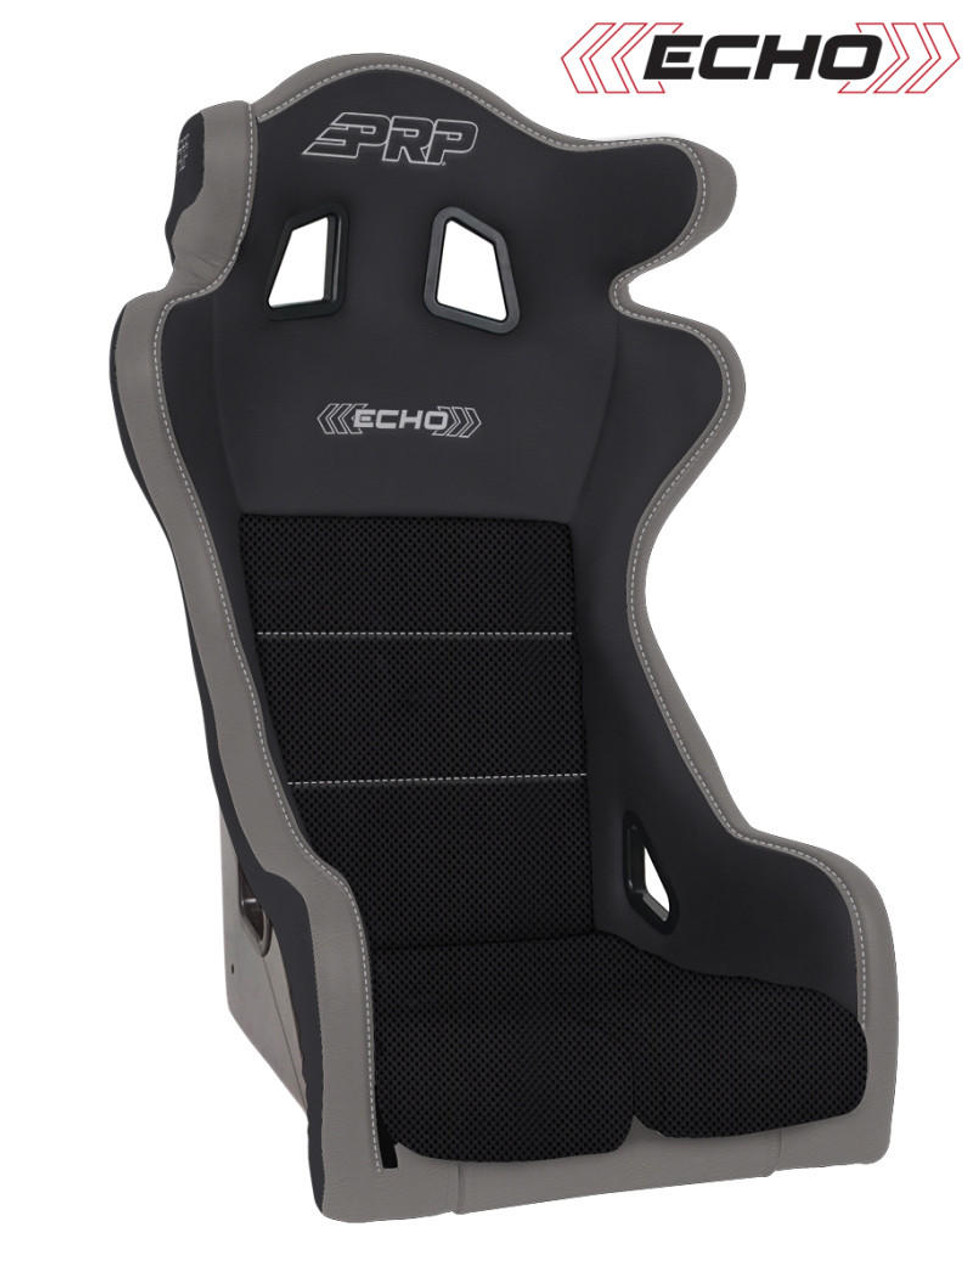 PRP Seats PRP Echo Composite Seat- Black/Grey PRP Silver Outline/Delta Silver- Silver Stitching - A38-203